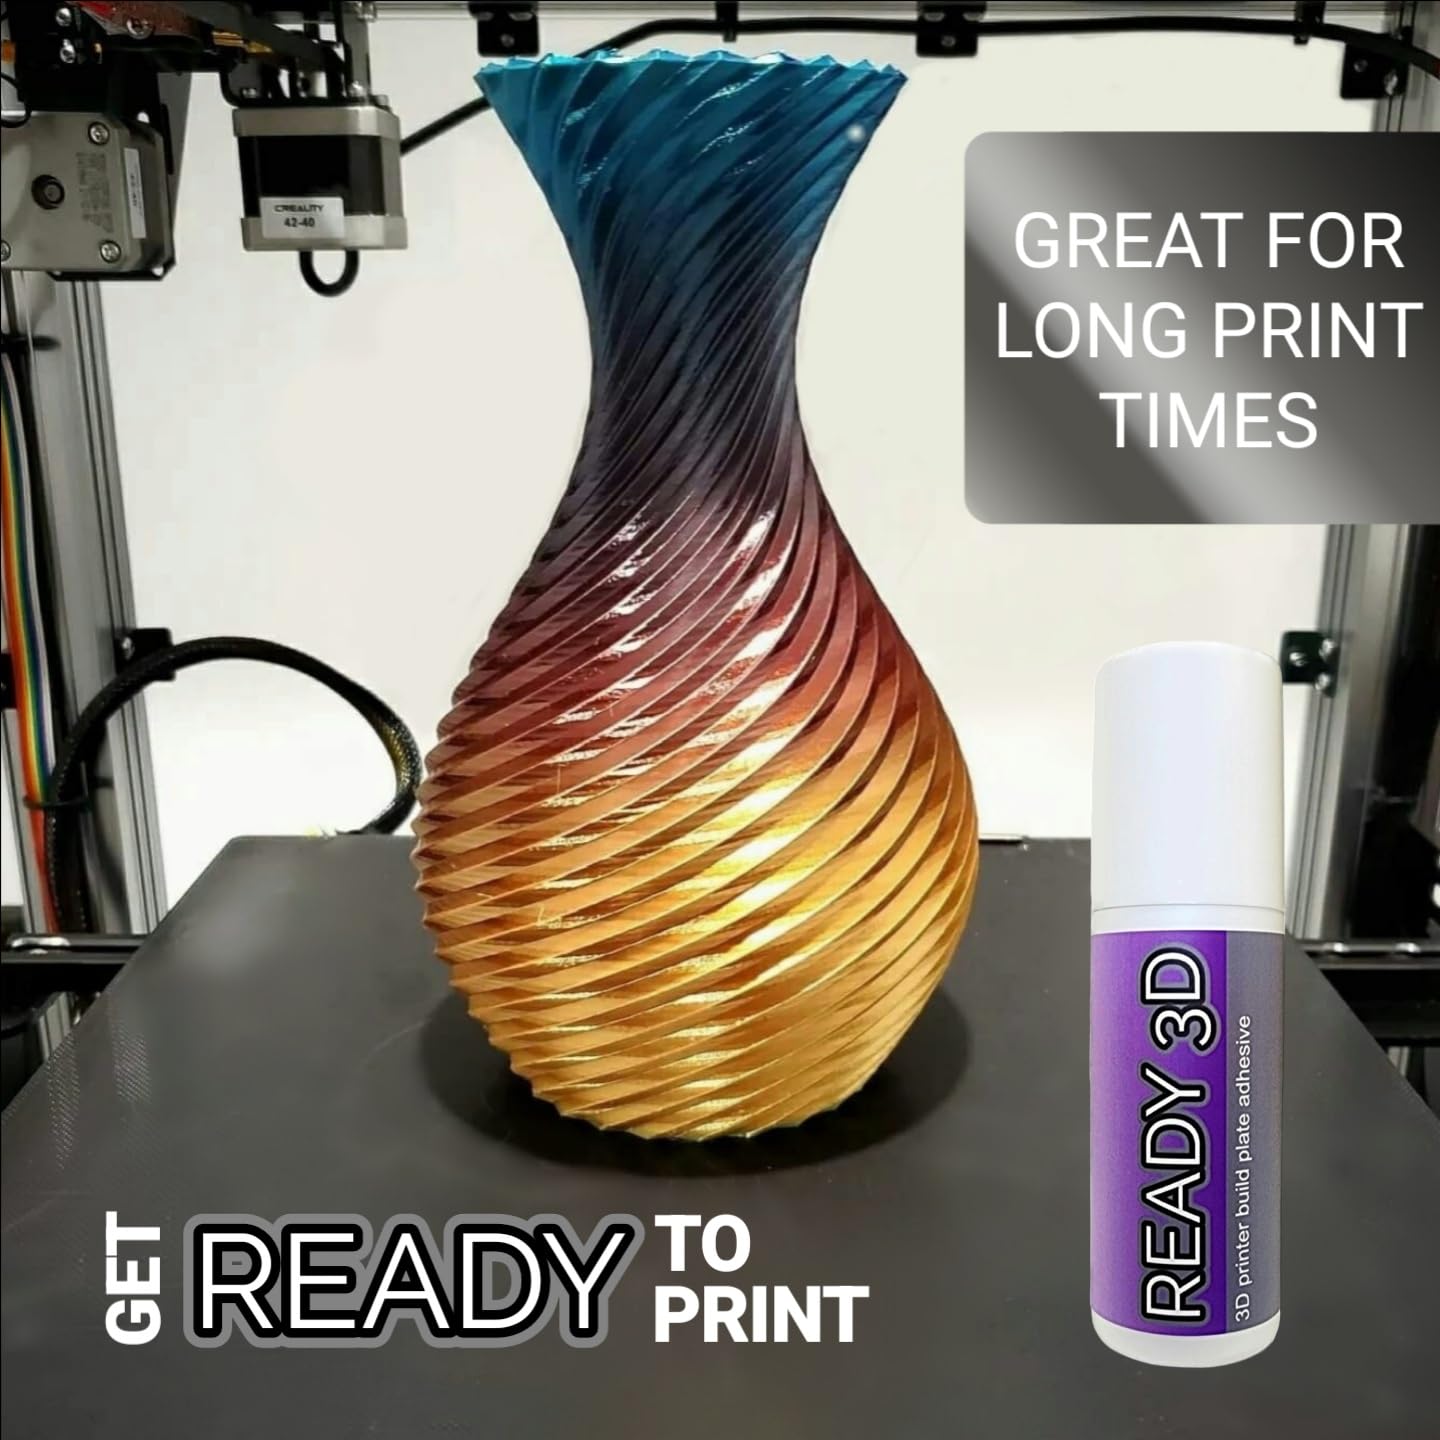 ready-3d-printer-build-plate-adhesive-and-build-plate-cleaner-excellent-hold-easy-release-non-toxic-and-odorless-1 Ready 3D Printer Build Plate Adhesive Review